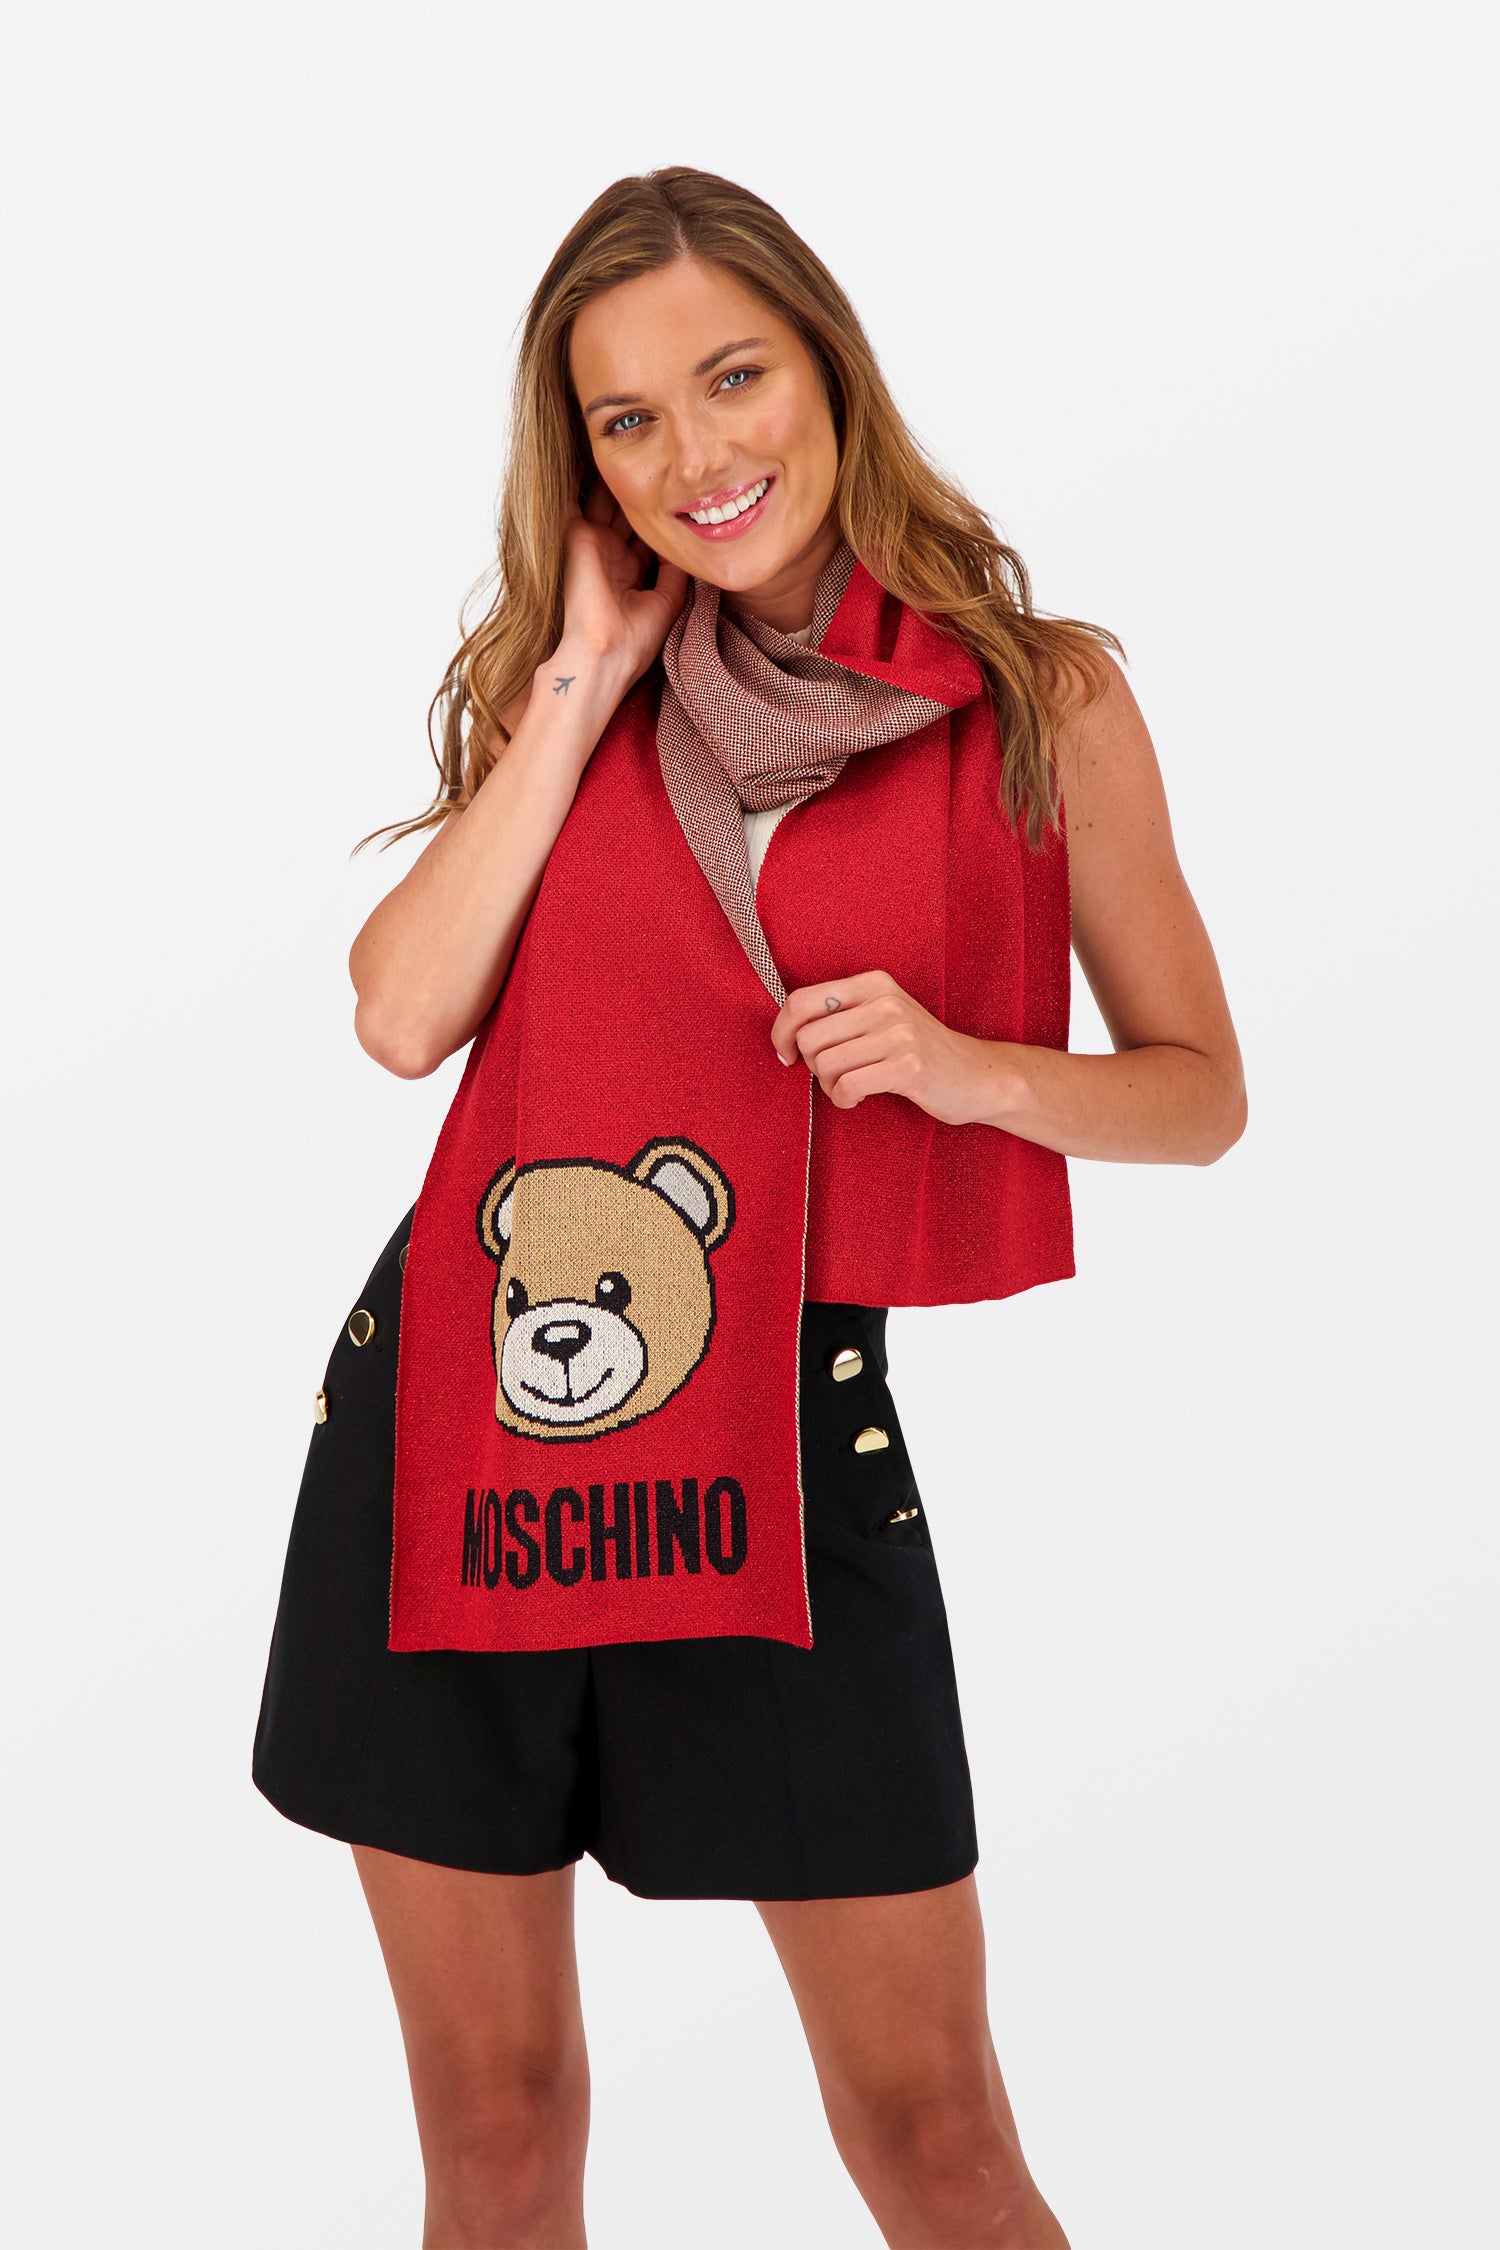 Moschino Red Teddy Printed Scarf